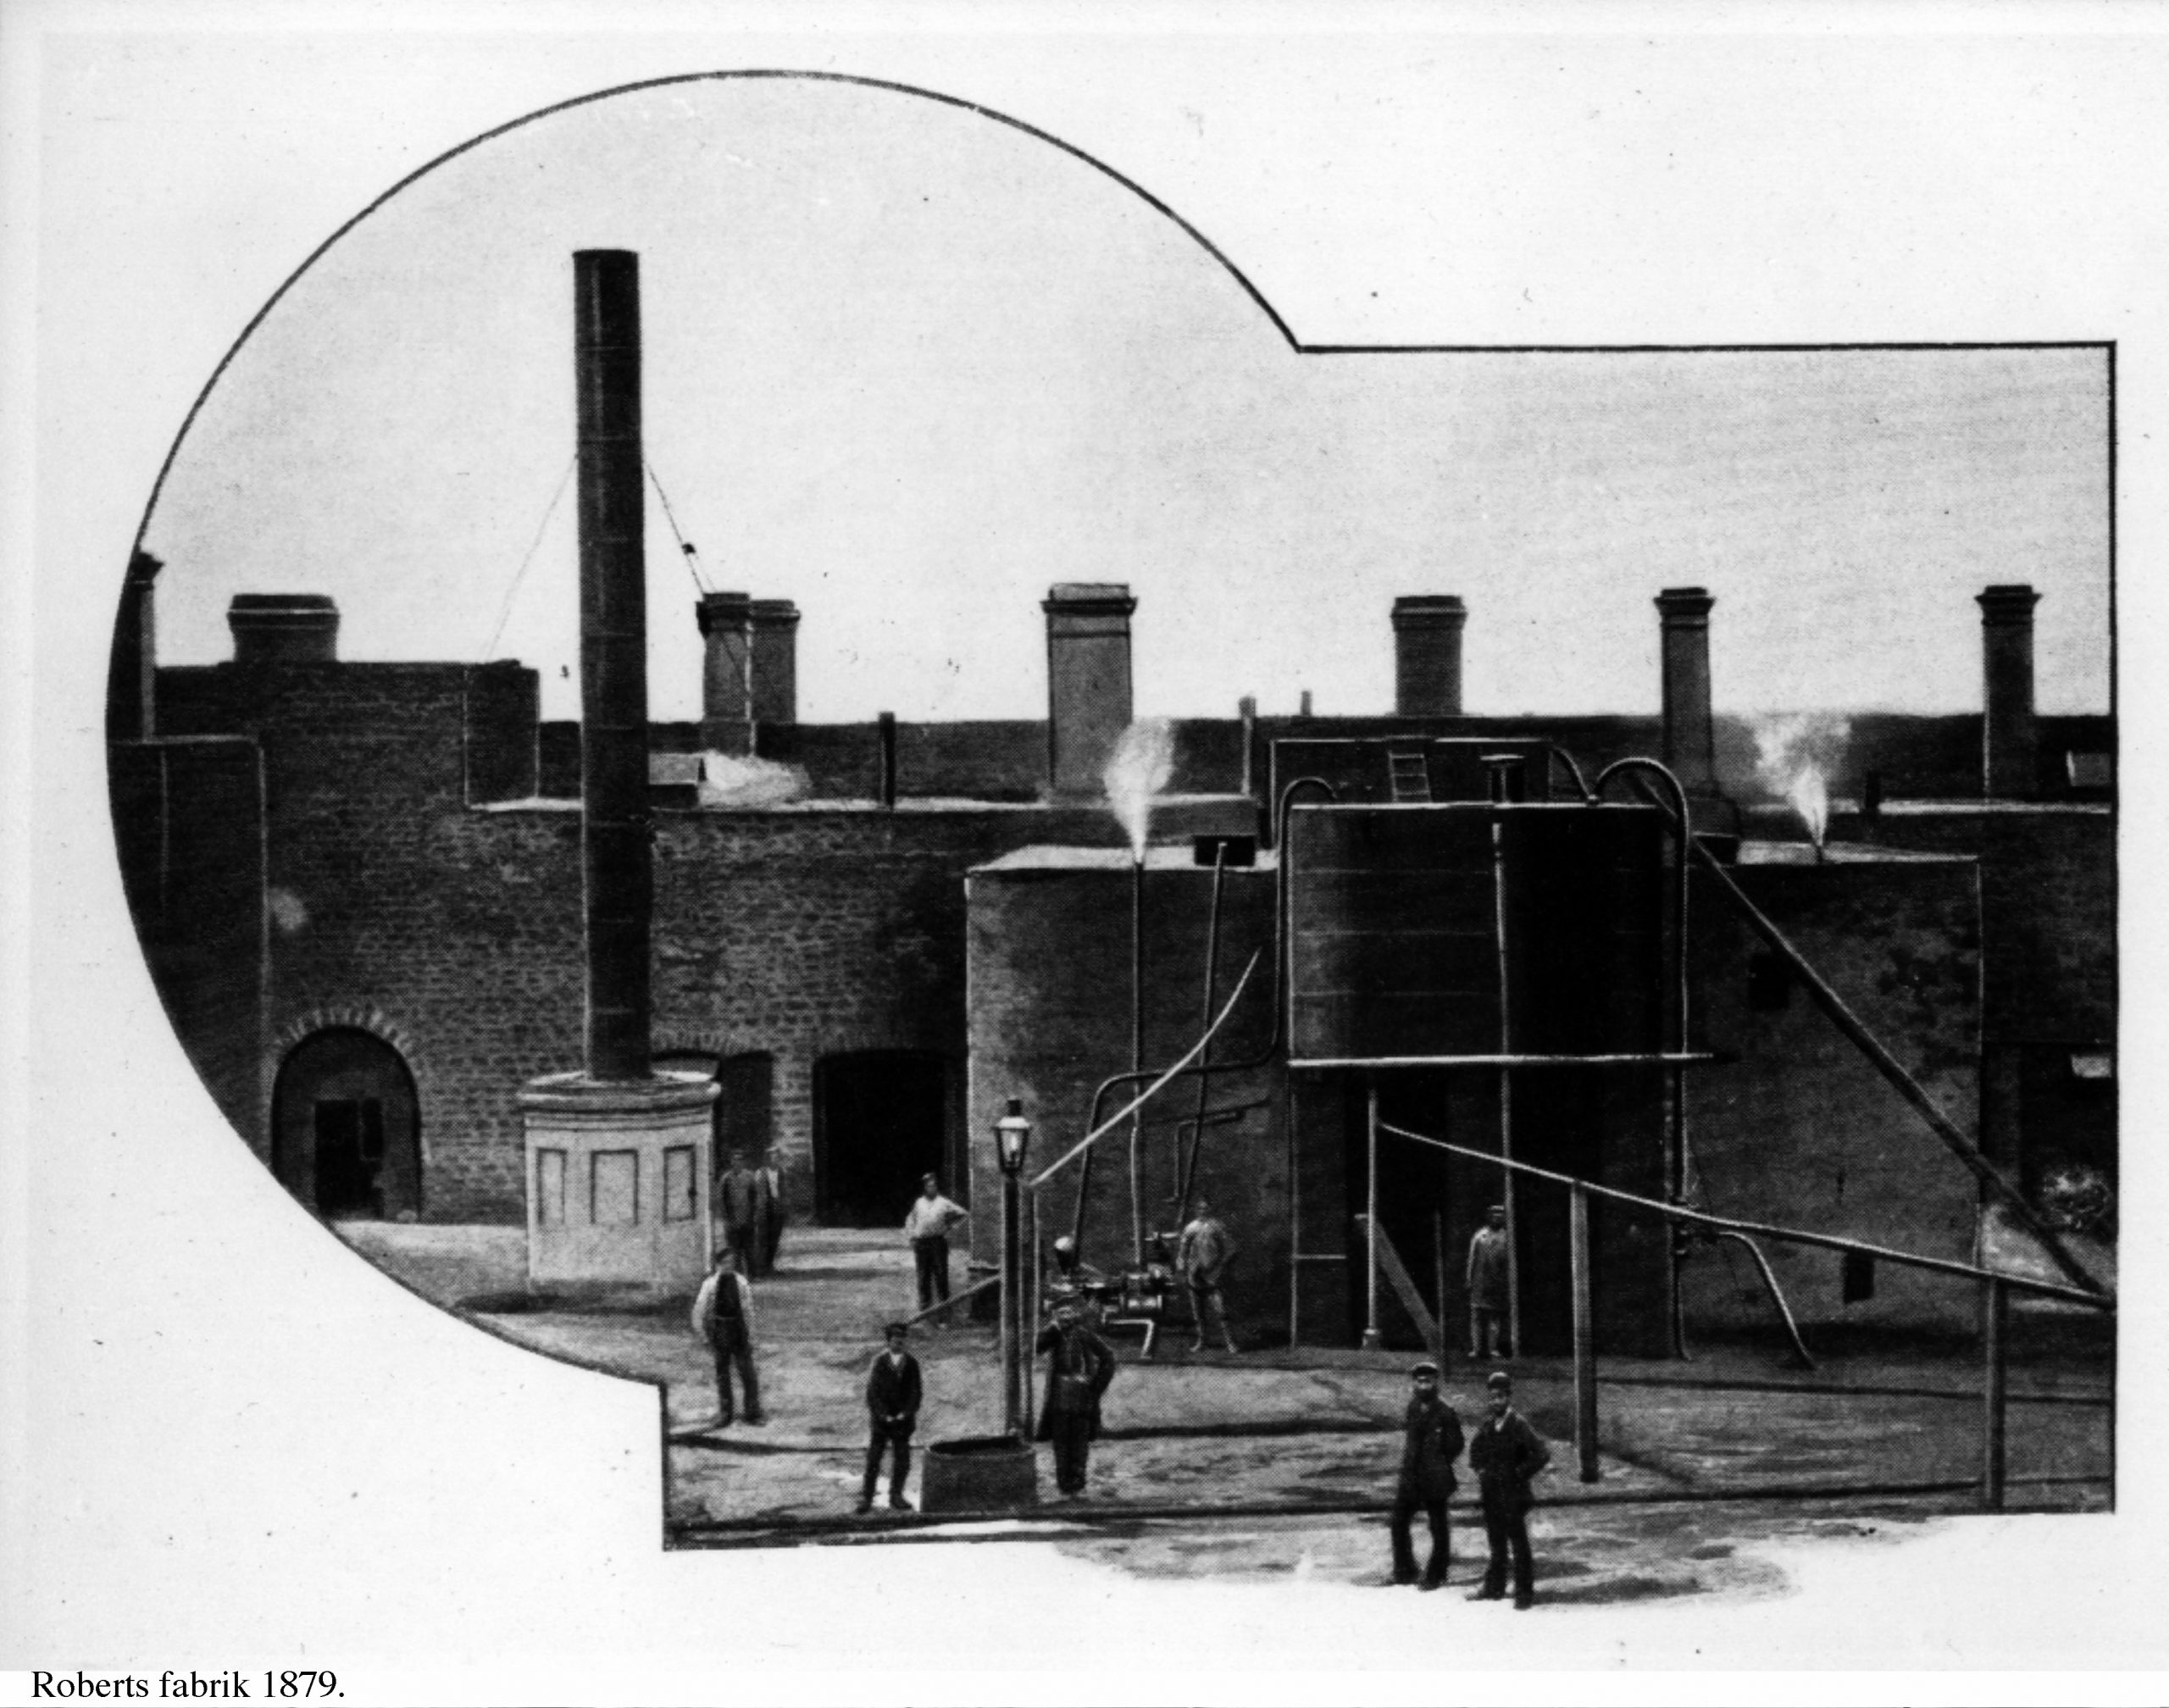 The first paraffin plant bought by Robert Nobel in 1875, that was a starting point for Branobel’s activities in Baku.